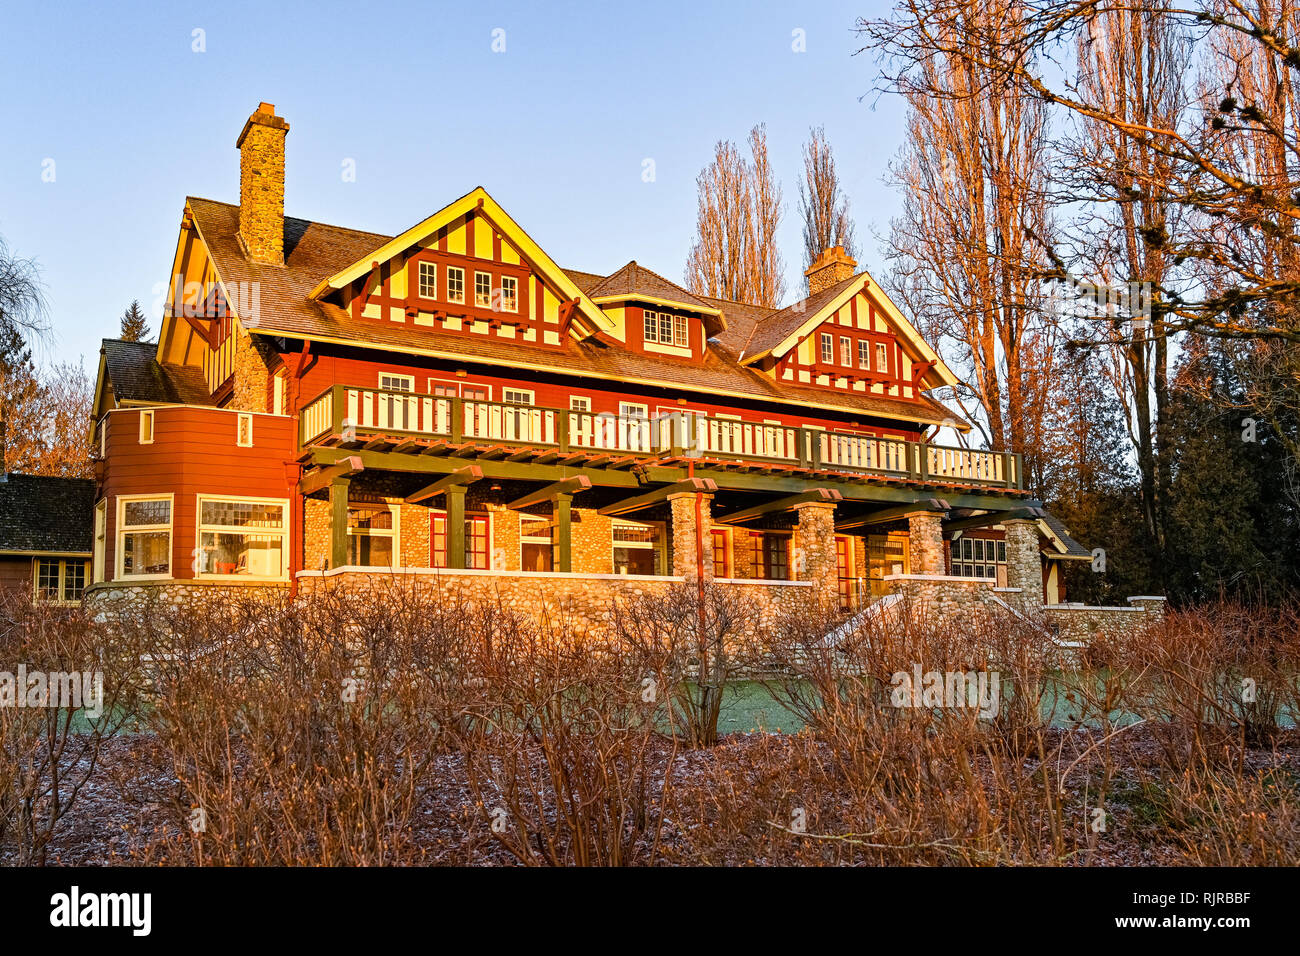 Burnaby Art Gallery, Deer Lake Park, Burnaby, Colombie-Britannique, Canada Banque D'Images